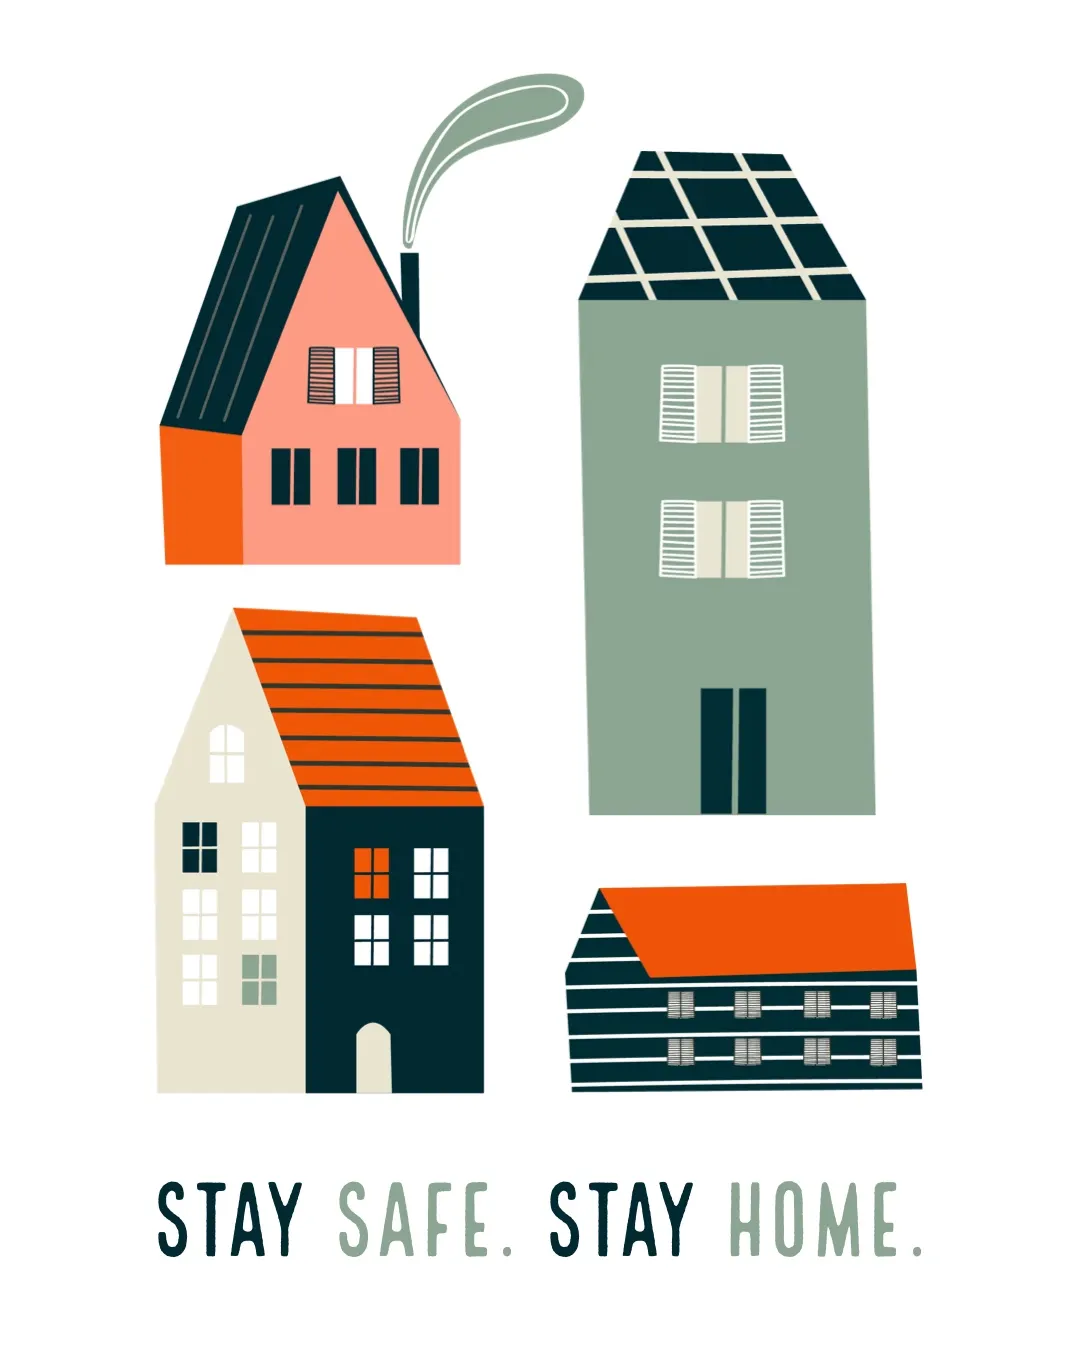 House Illustrations Stay Home during Pandemic Instagram Portrait Graphic